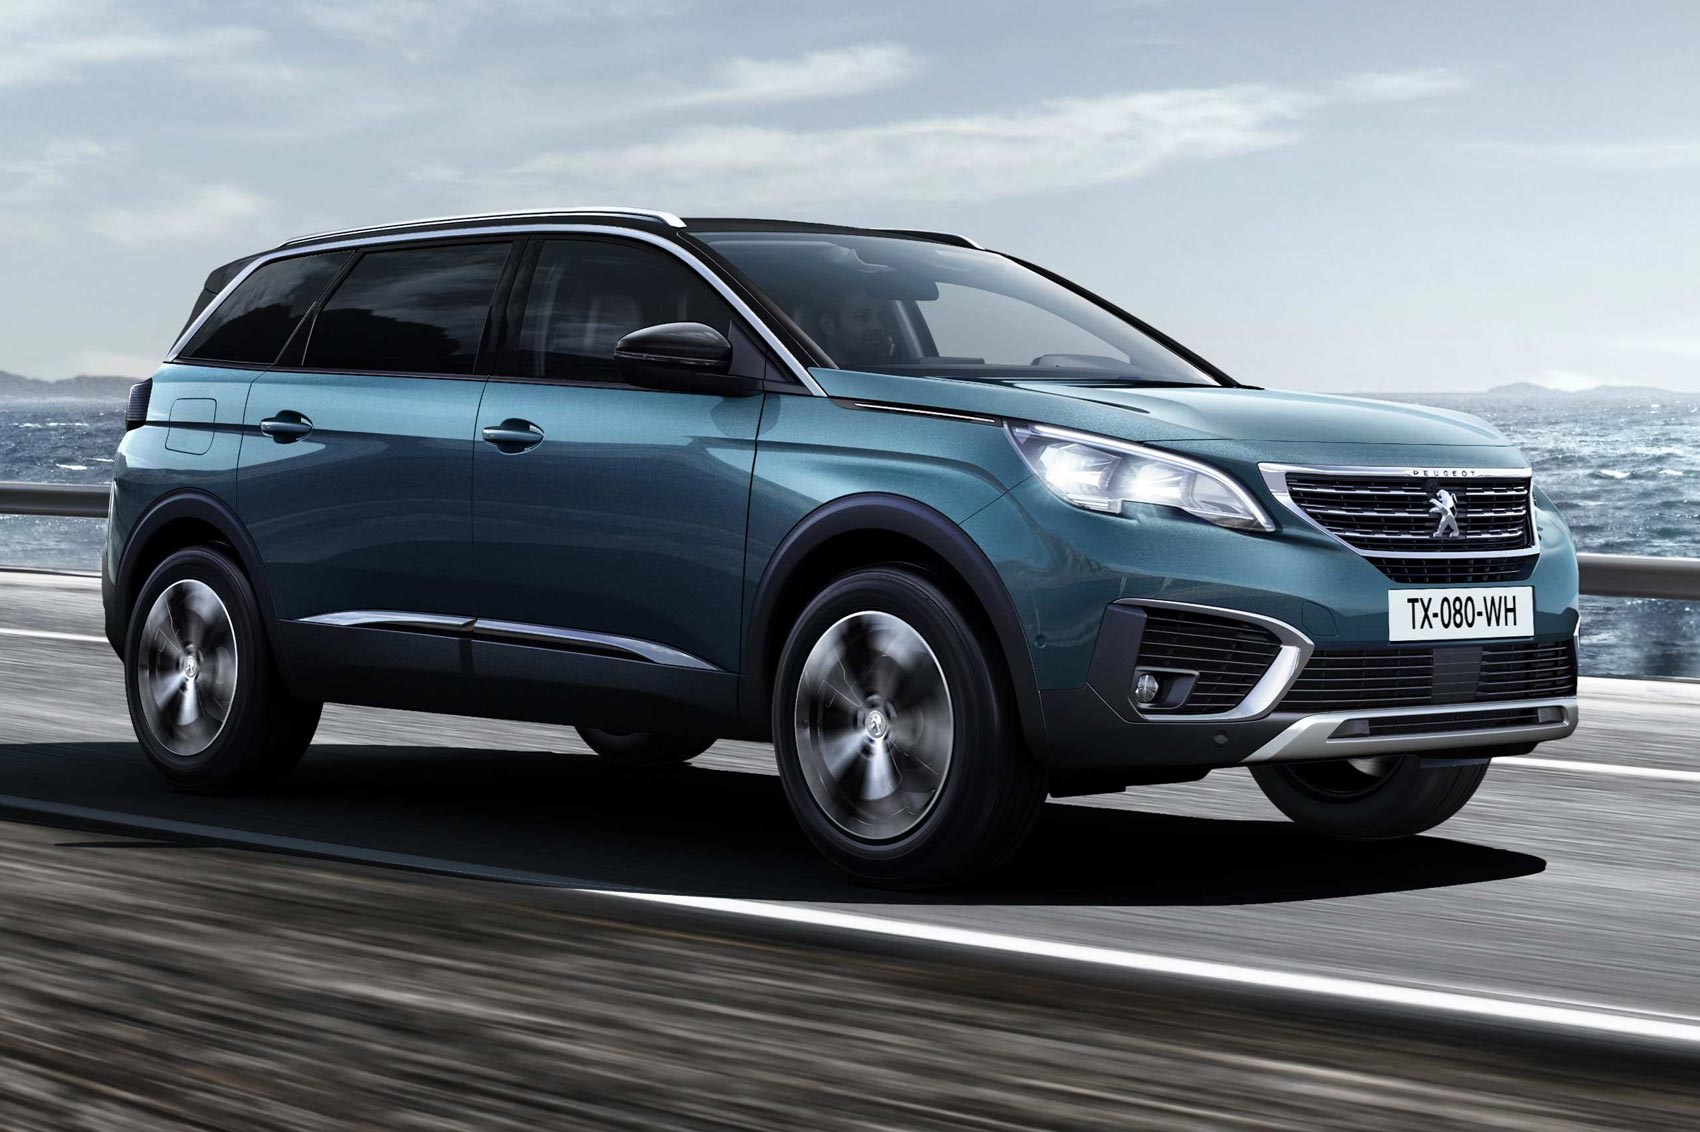 New Peugeot 5008 SUV – Discover More.